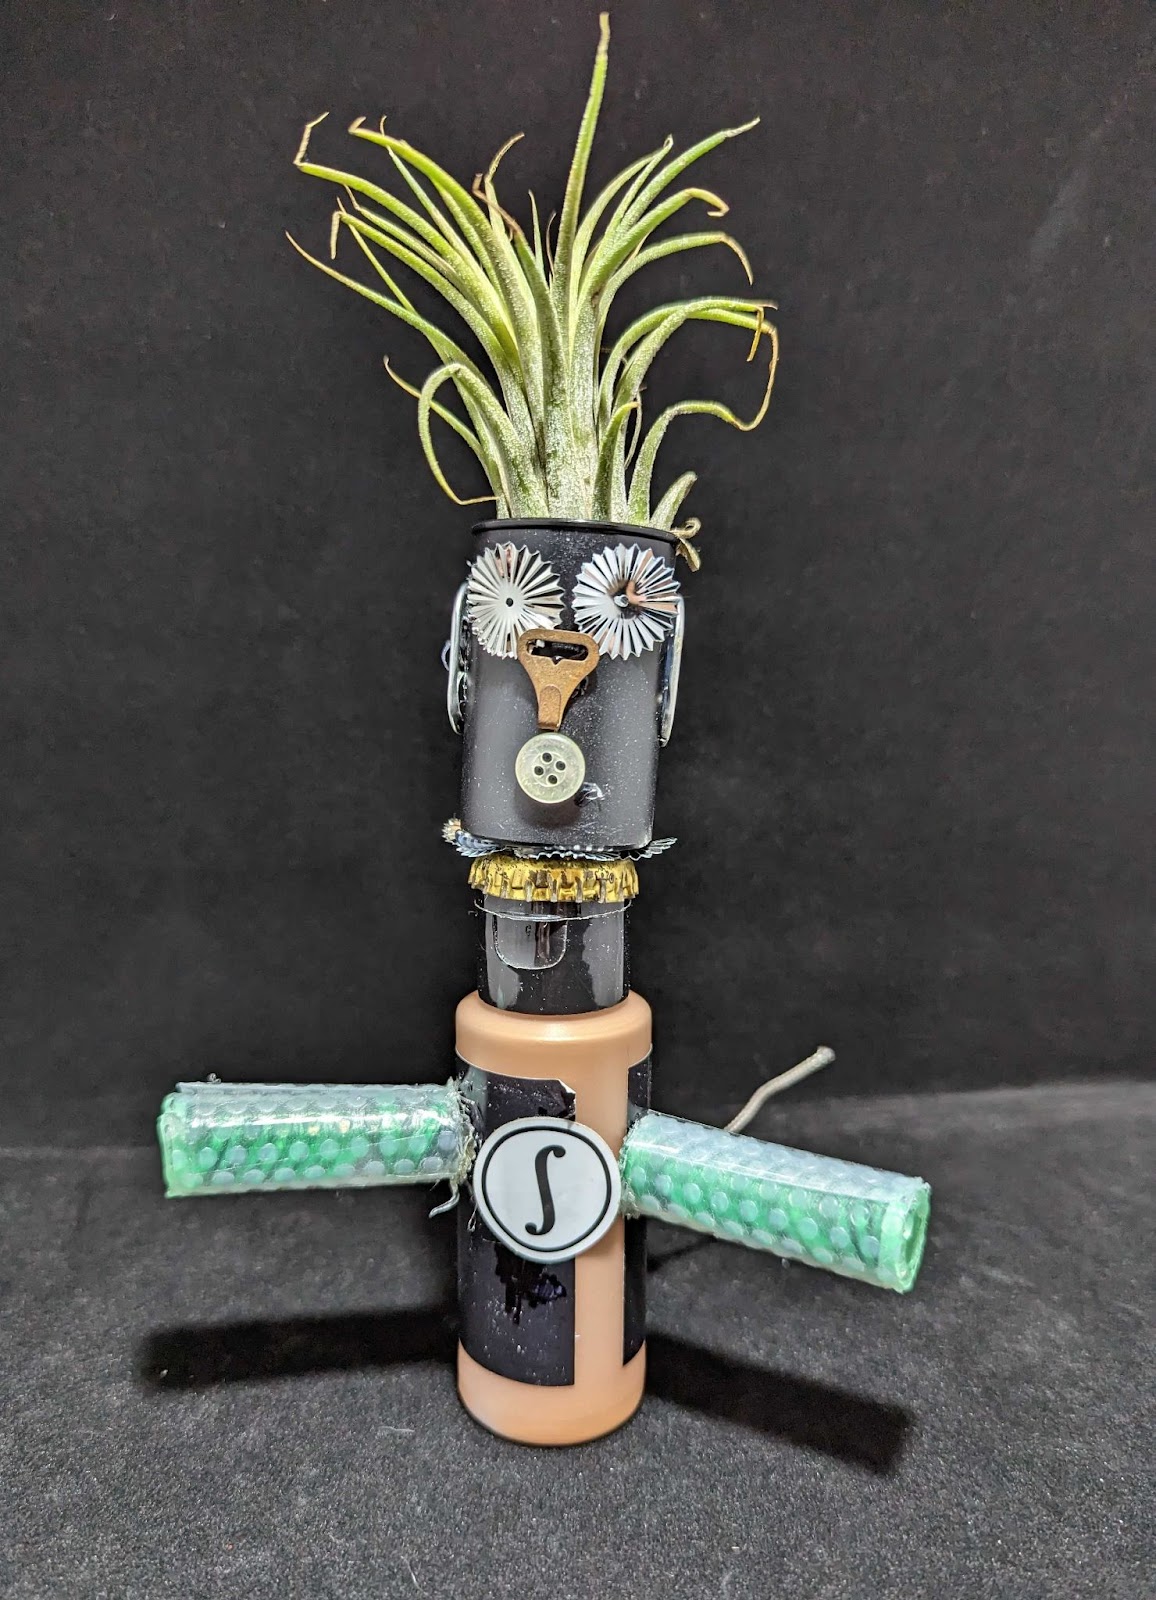 Homemade robot plant holder picture 5 of 5